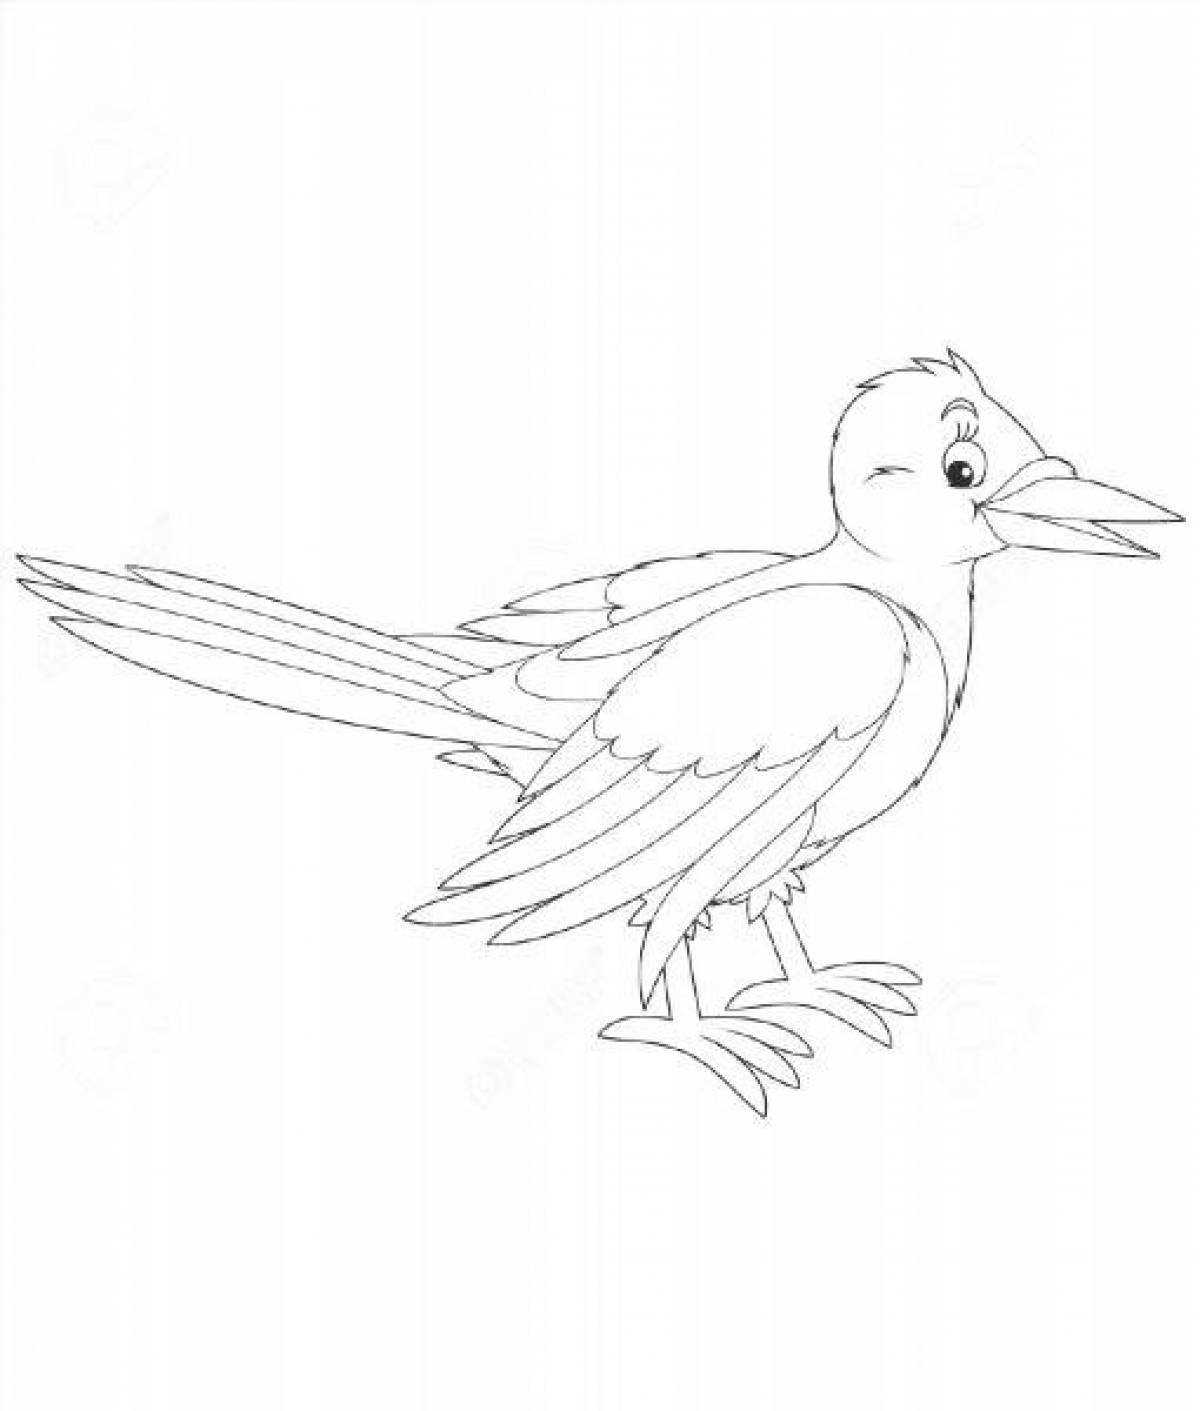 Magpie drawing